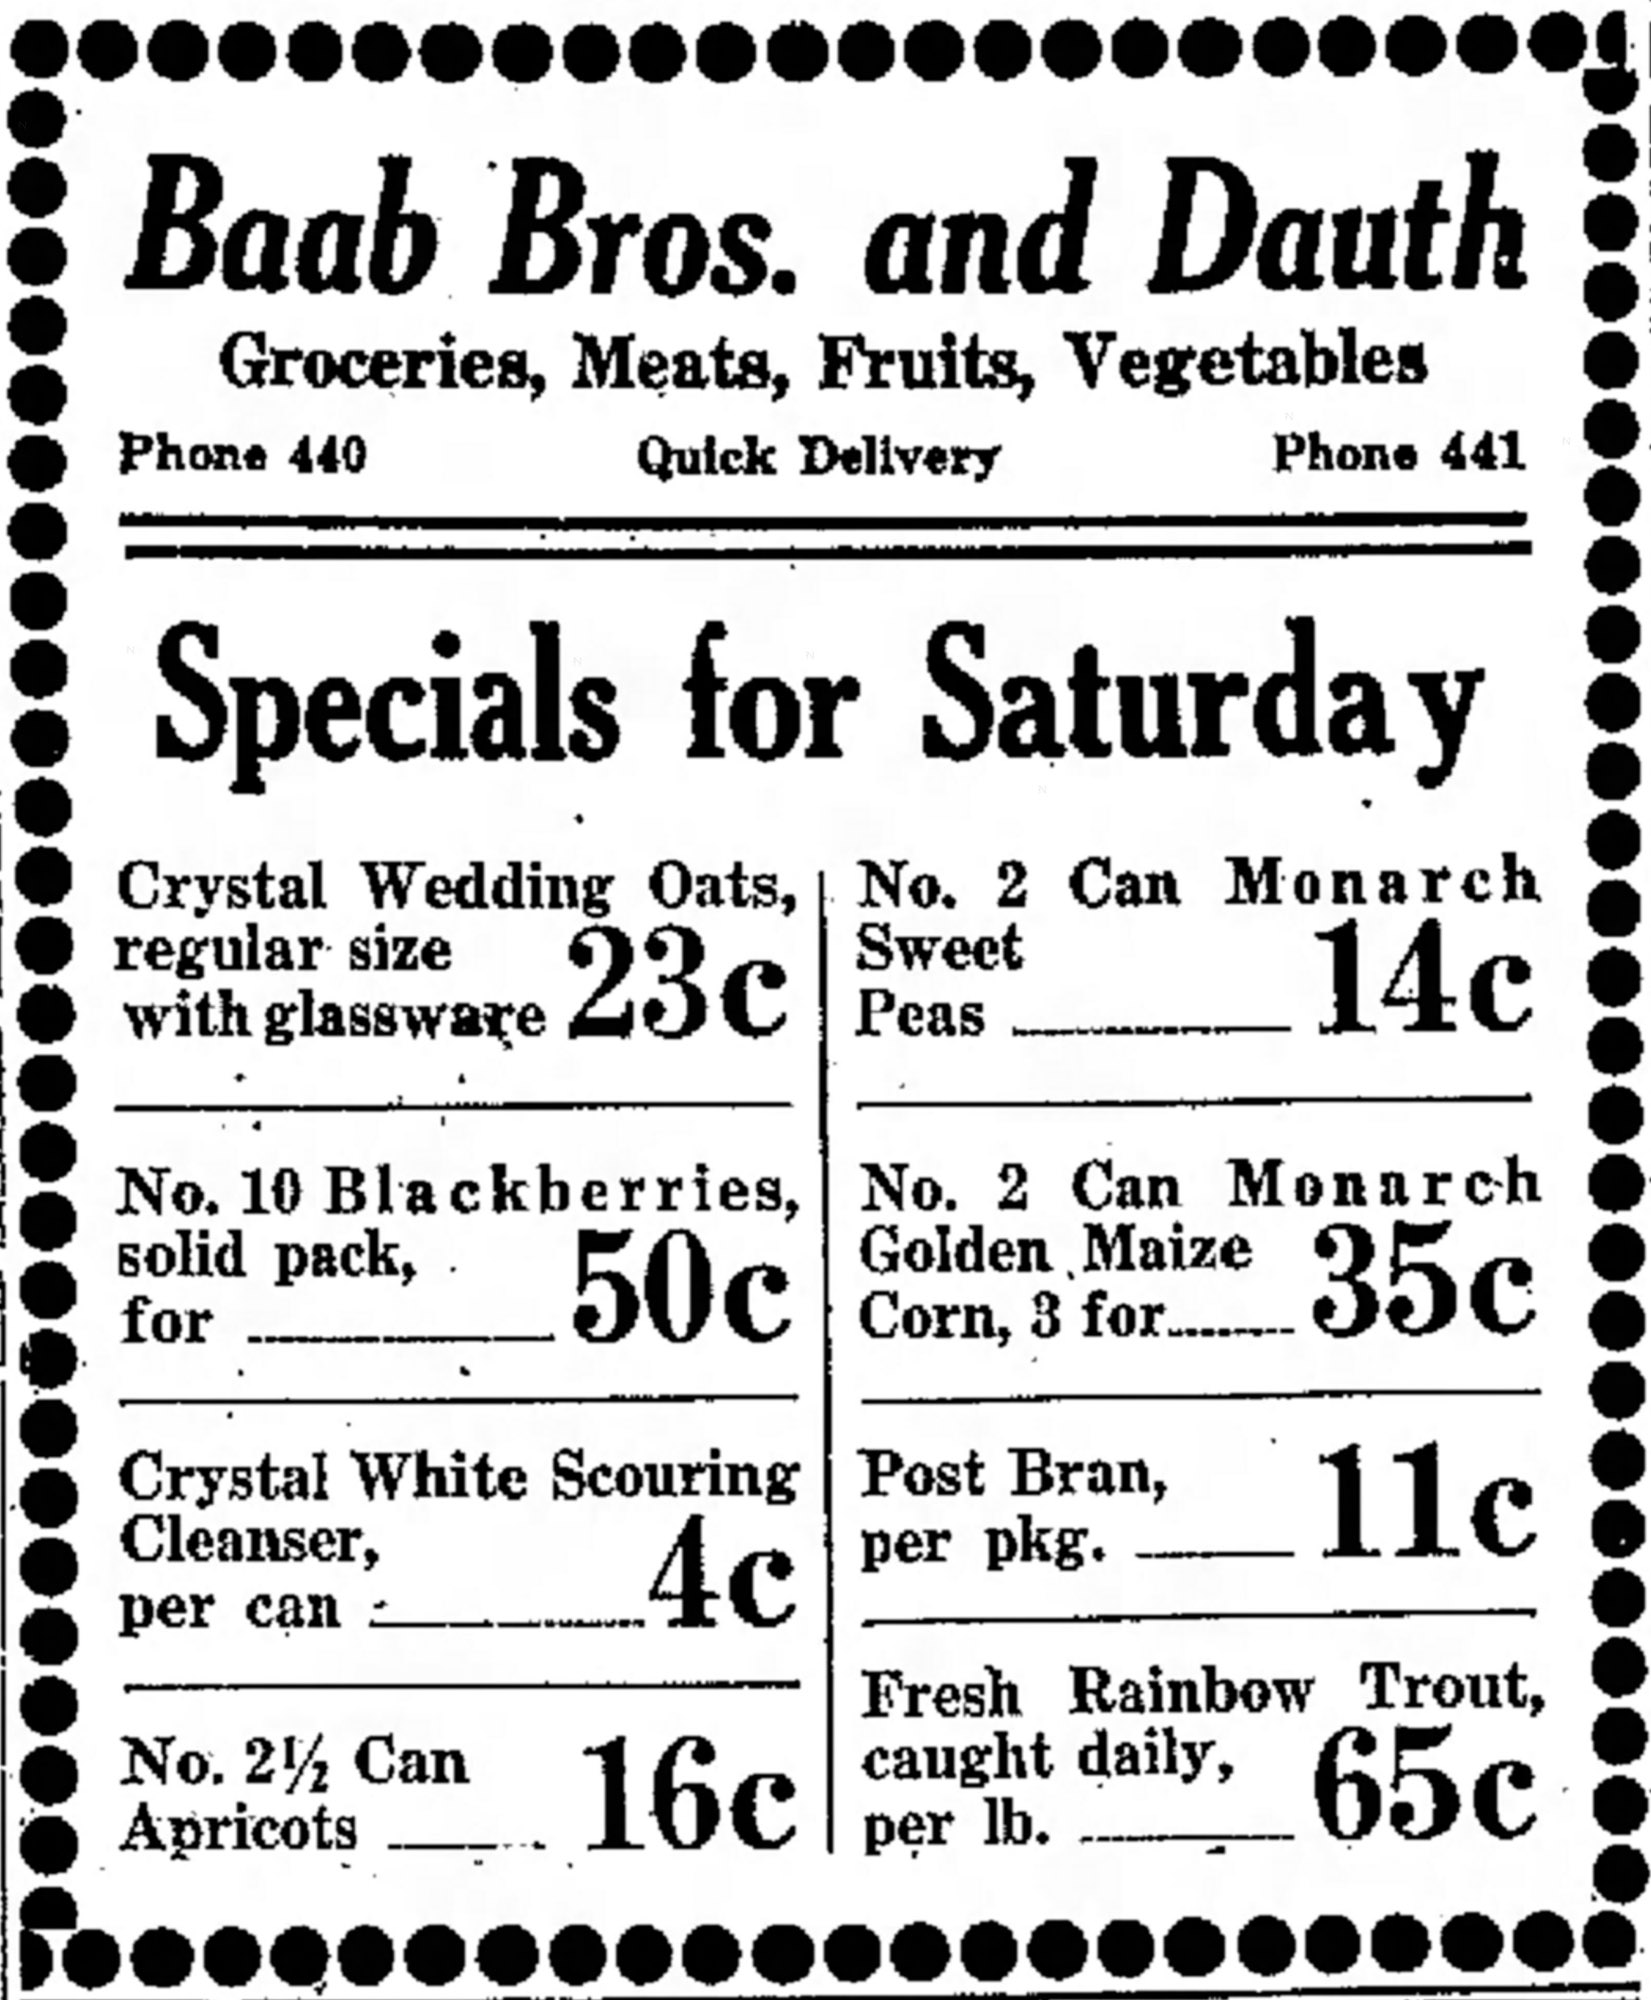 Dauth Family Archive - 1931-09-18 - Greeley Daily Tribune - Baab Bros and Dauth Advertisement